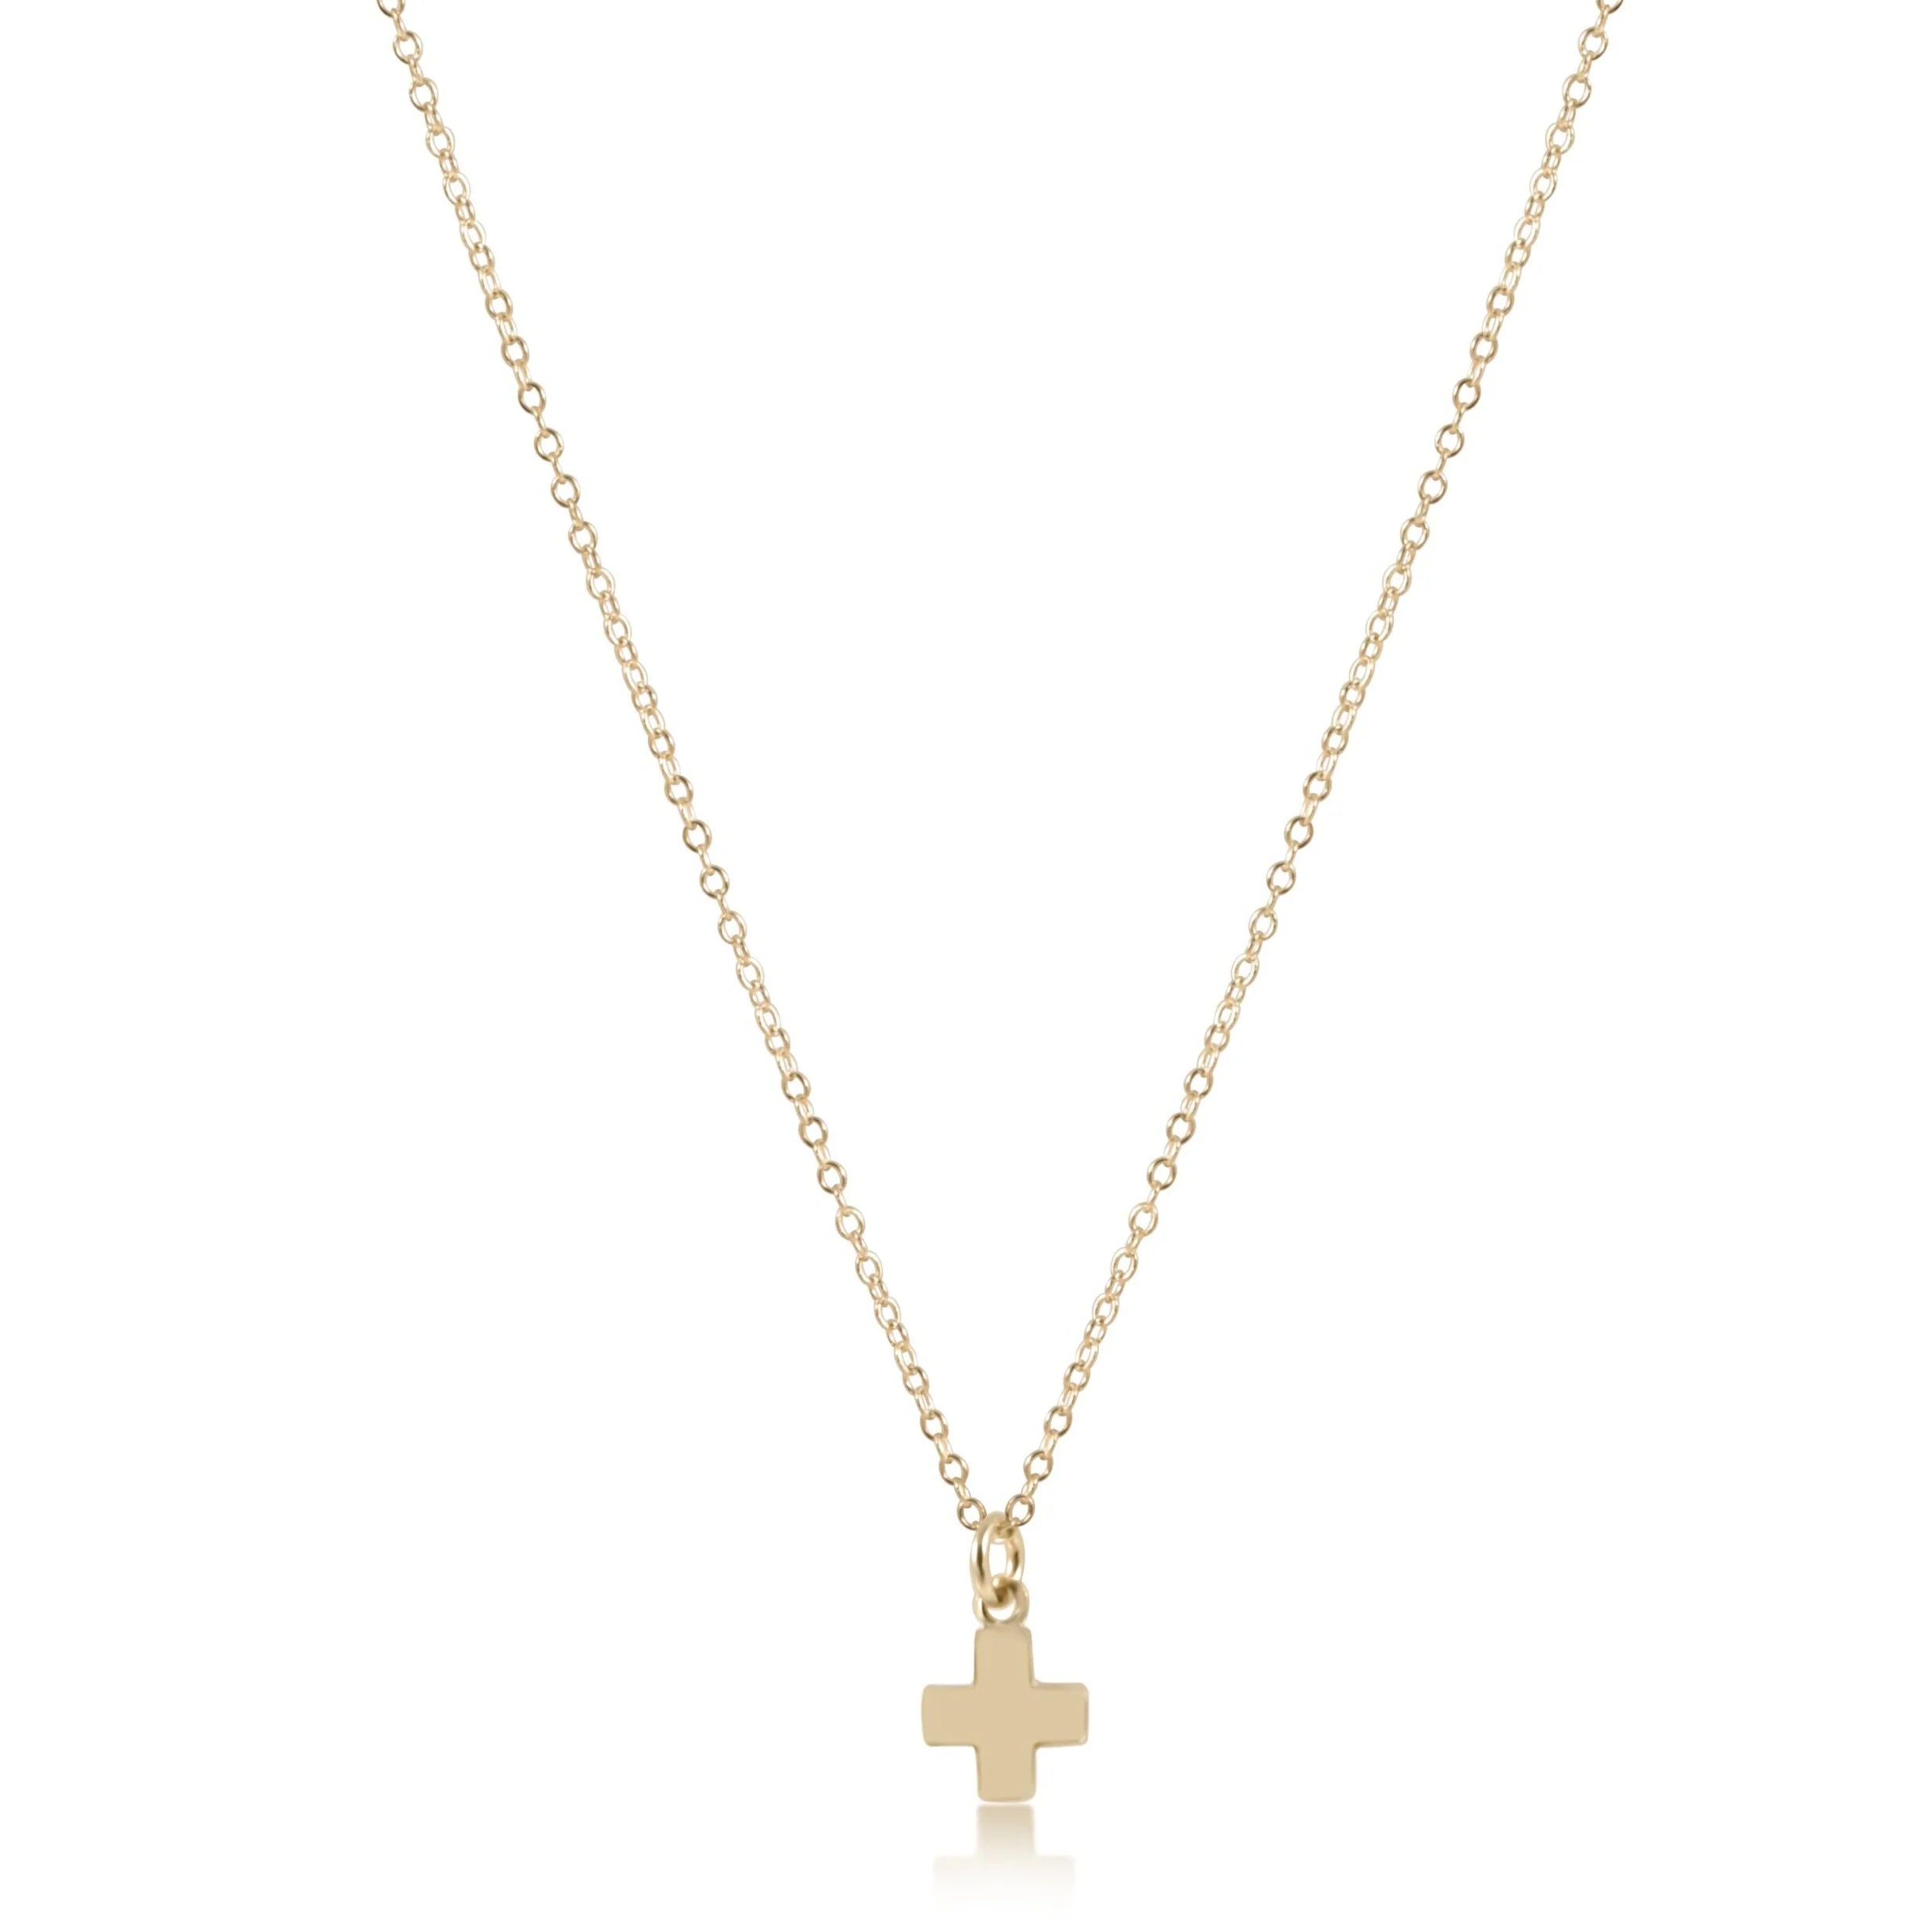 Gold Cross Charm on Gold Chain Necklace